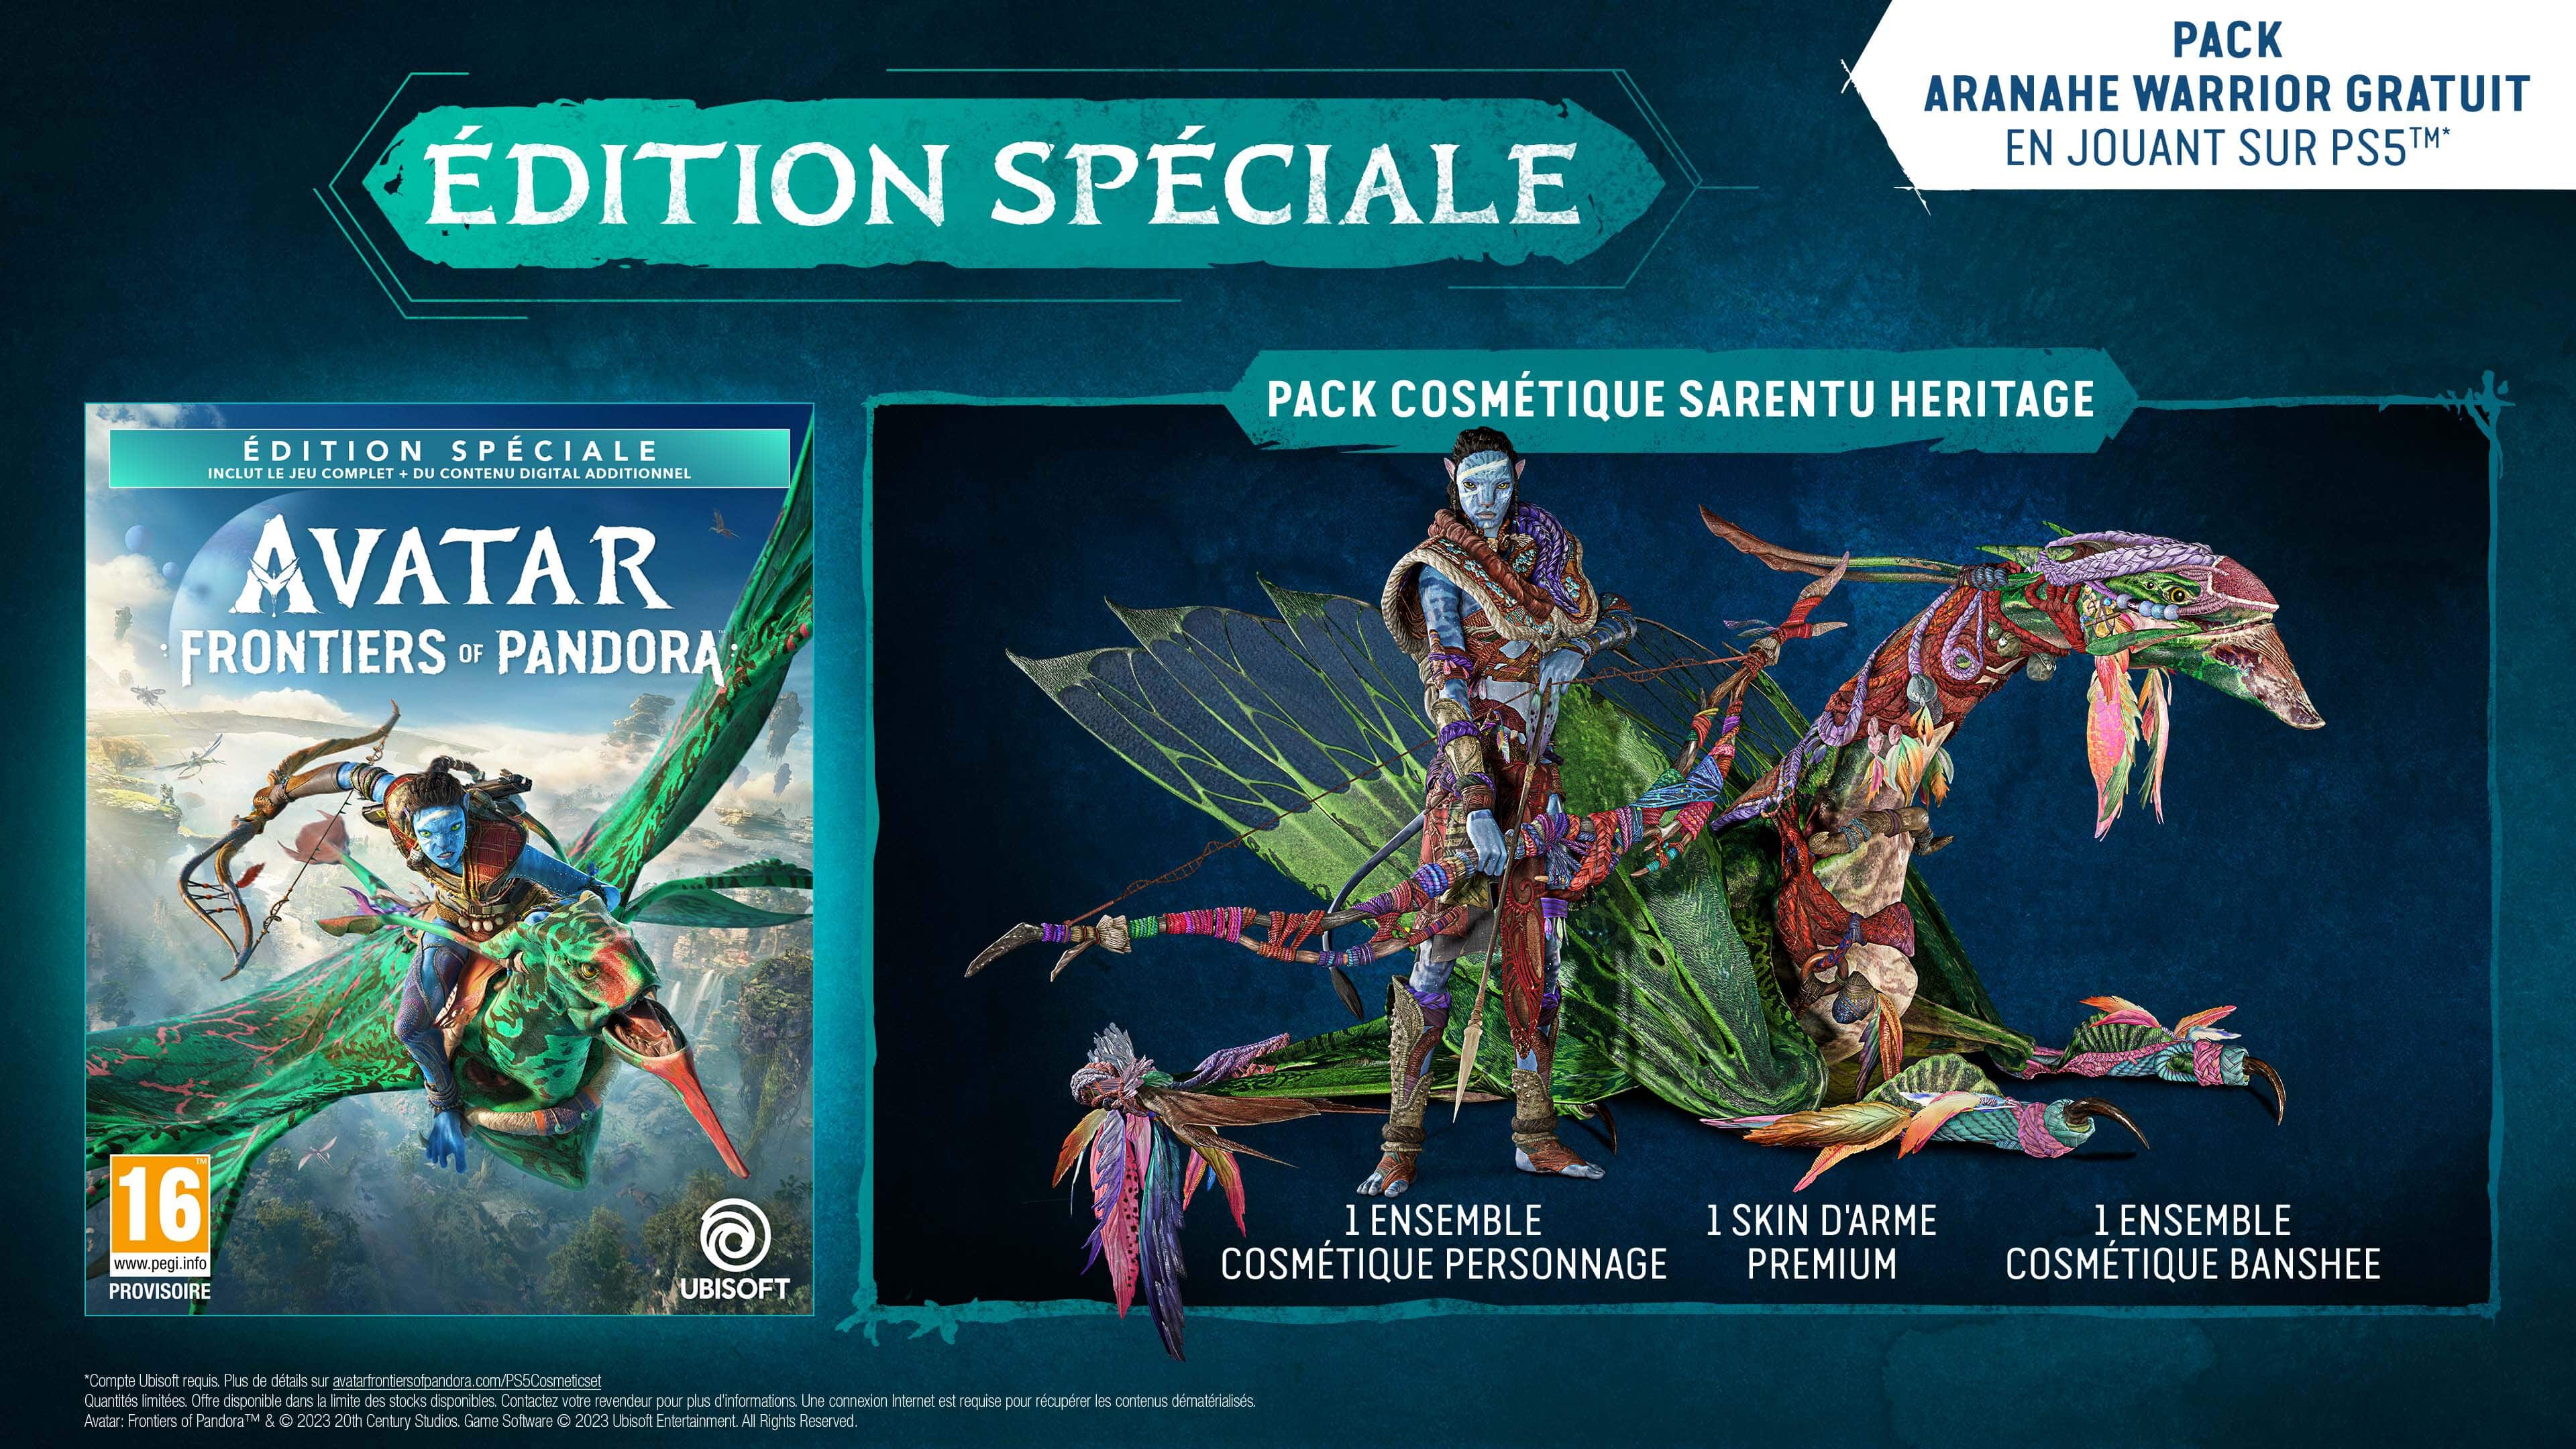 Edition special avatar frontiers of pandora 5